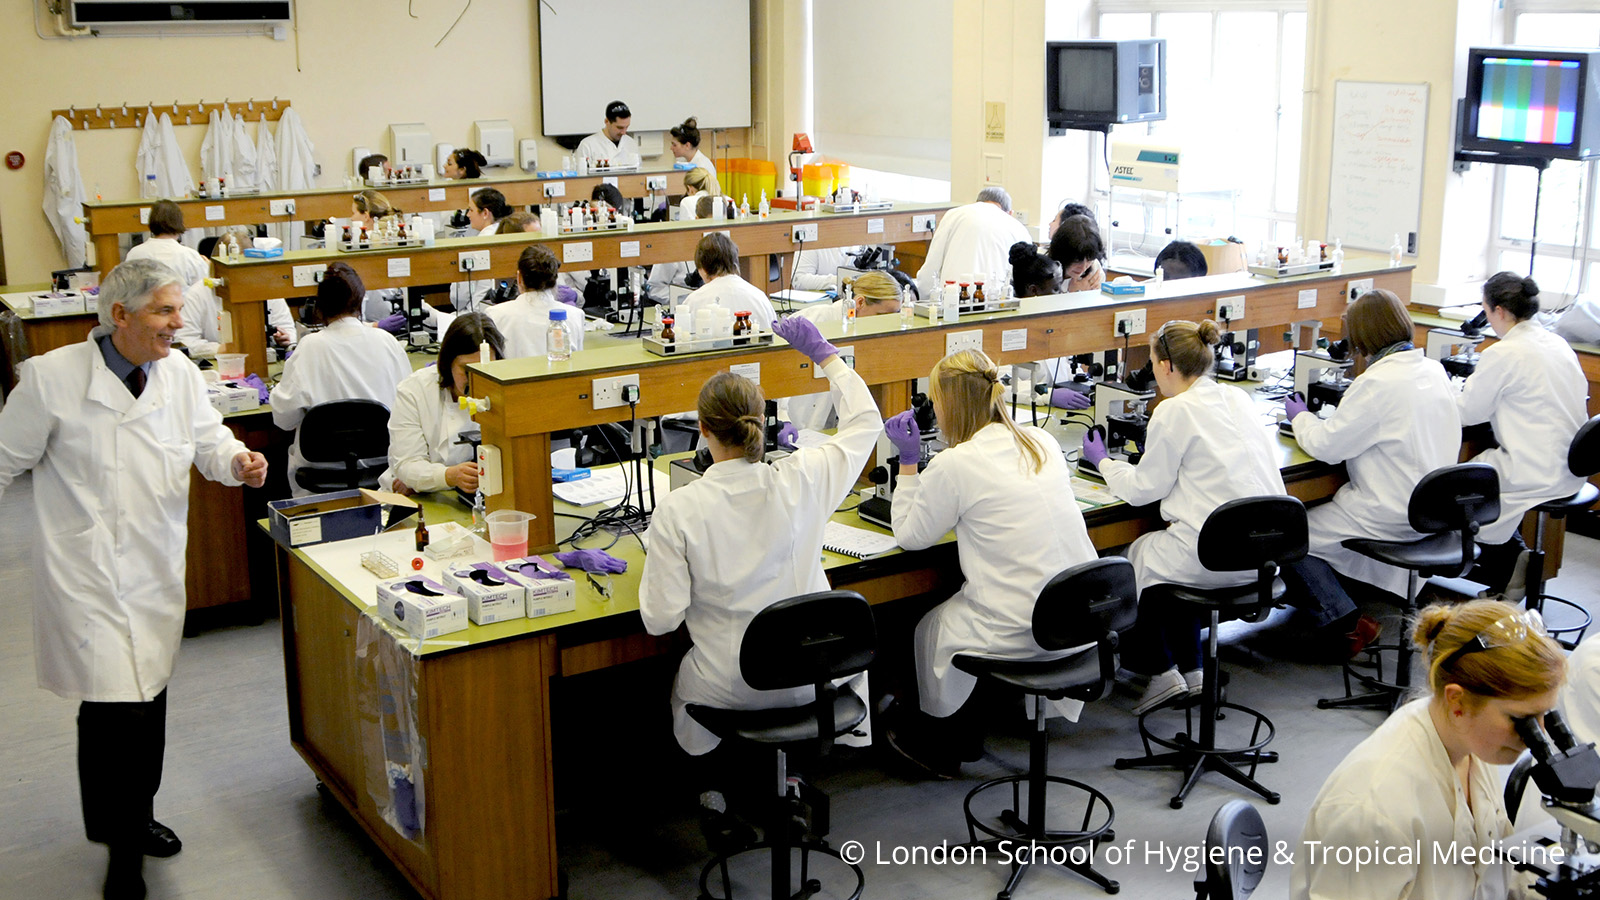 classroom photo from the london school of hygiene and tropical medicine